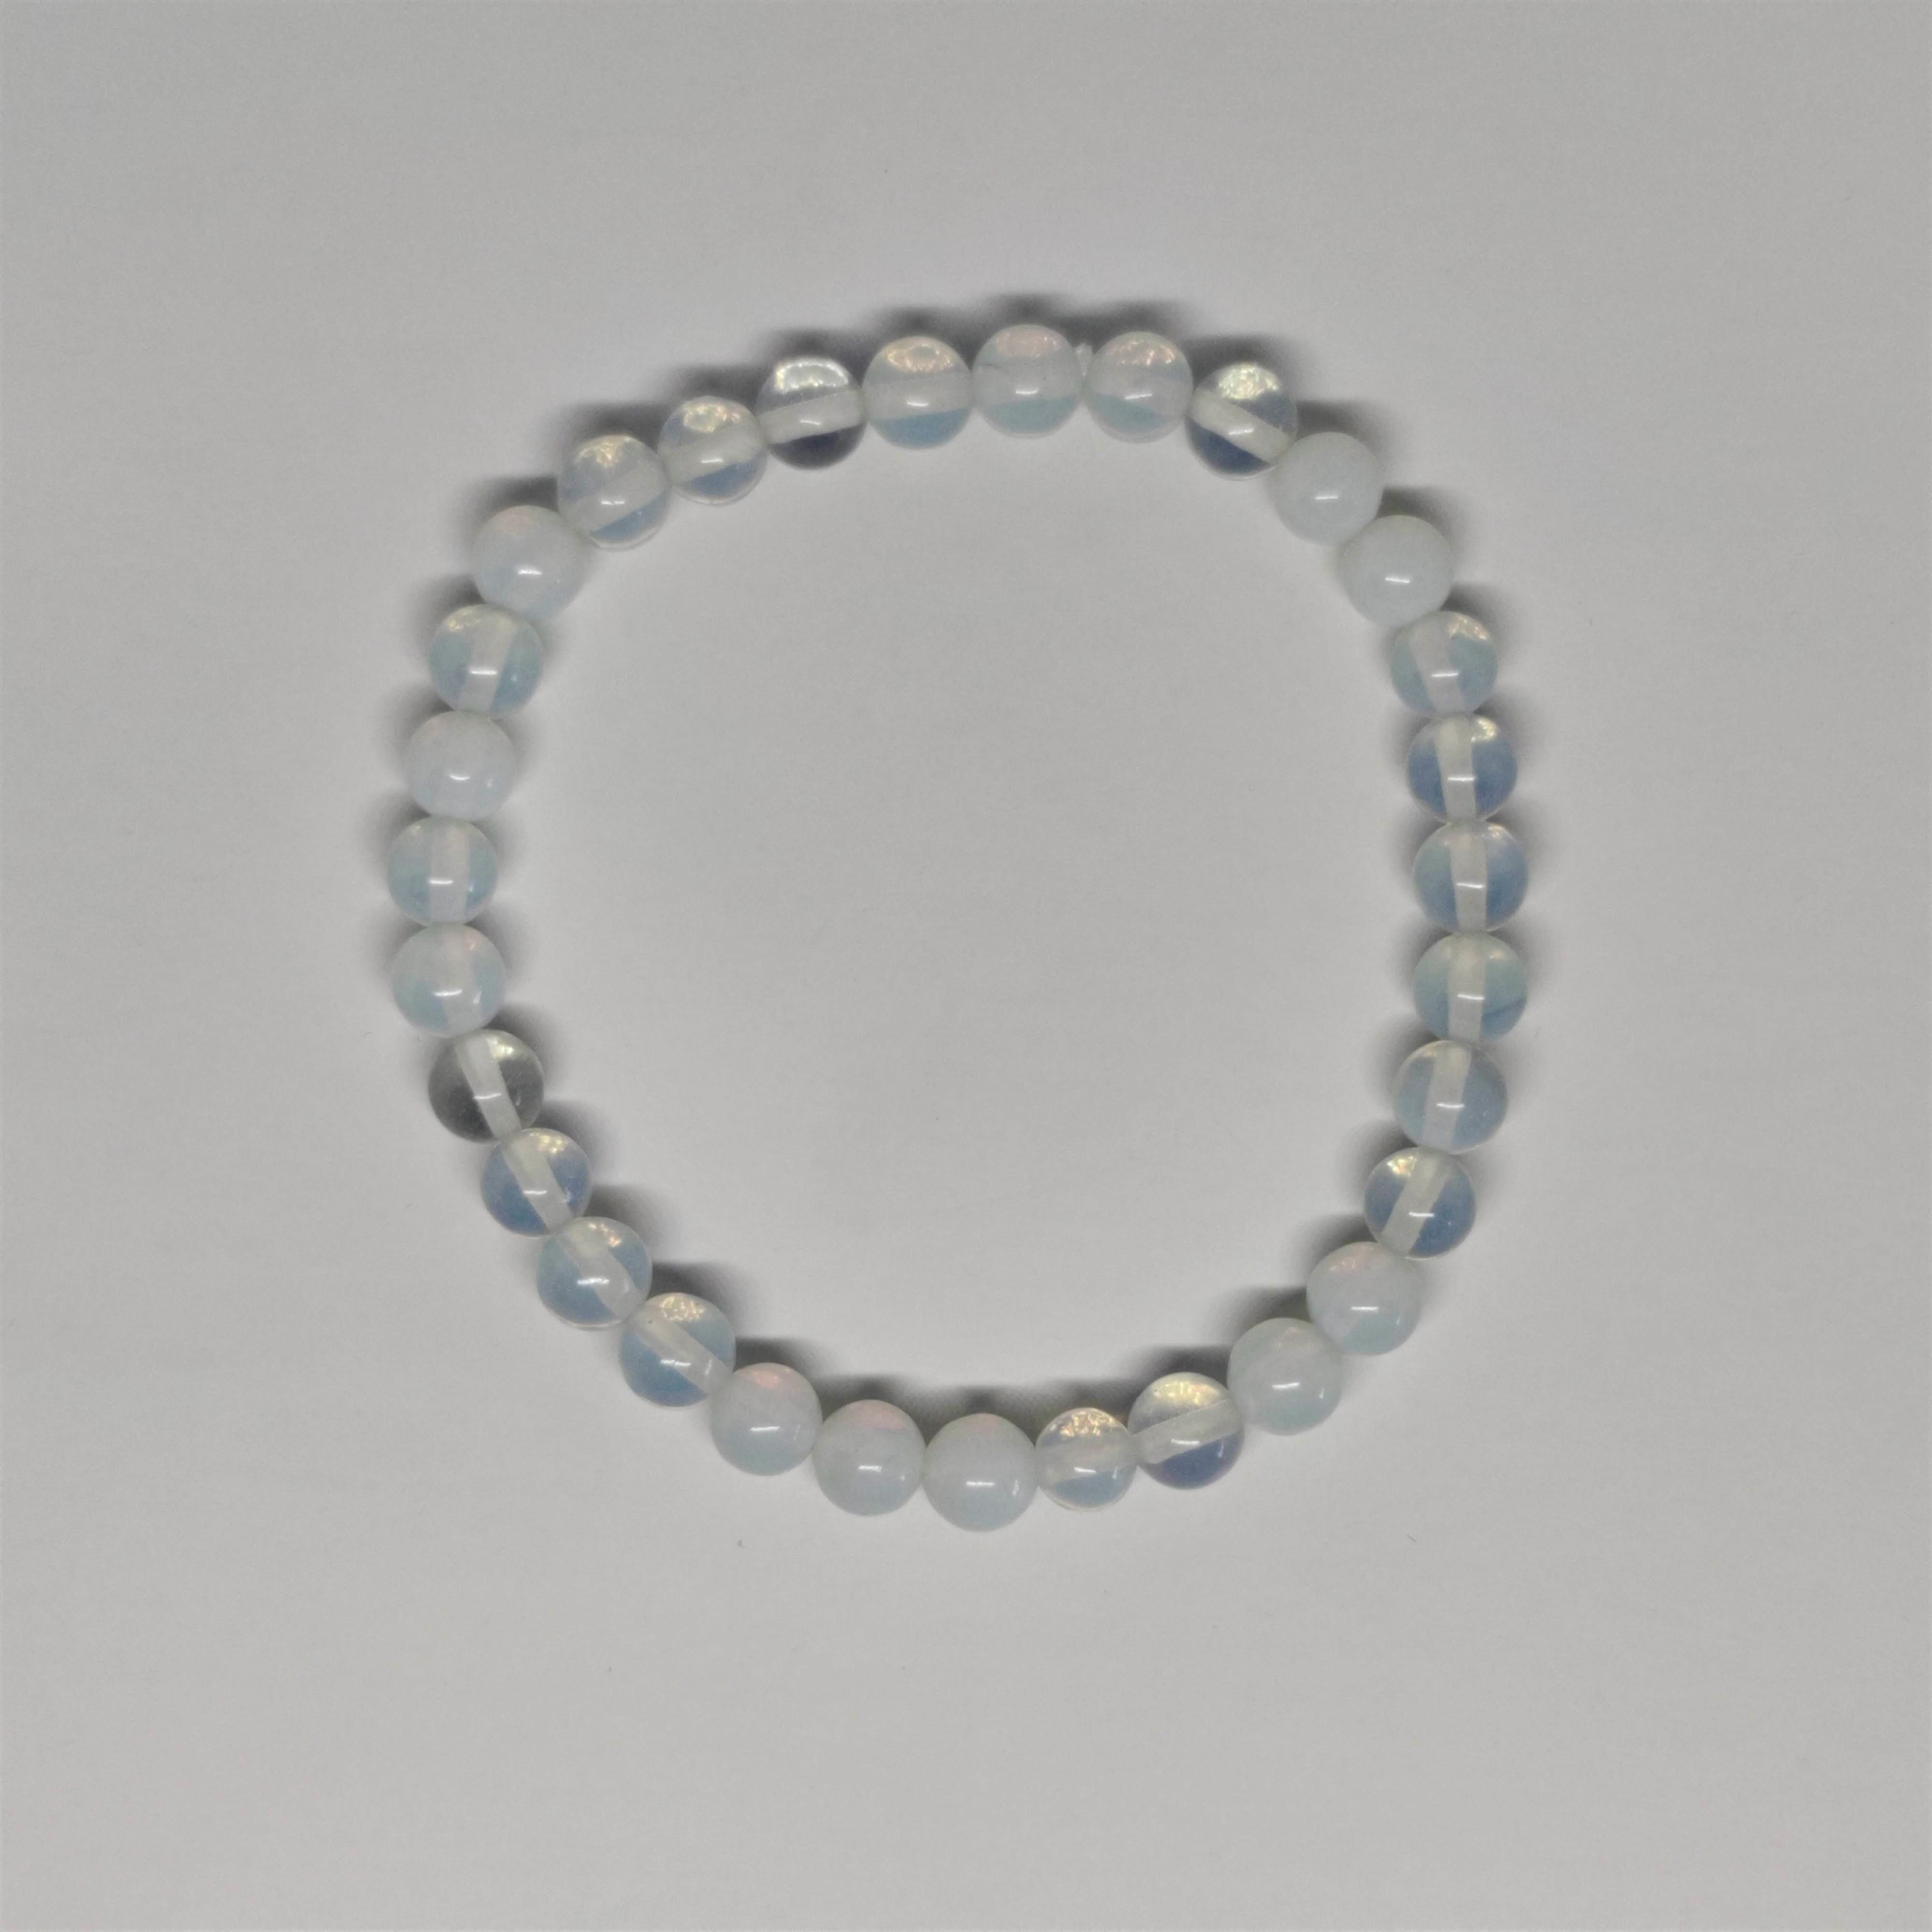 Buy Reiki Crystal Products Opalite Handmade Bracelet for Unisex Adult (Off  White) at Amazon.in